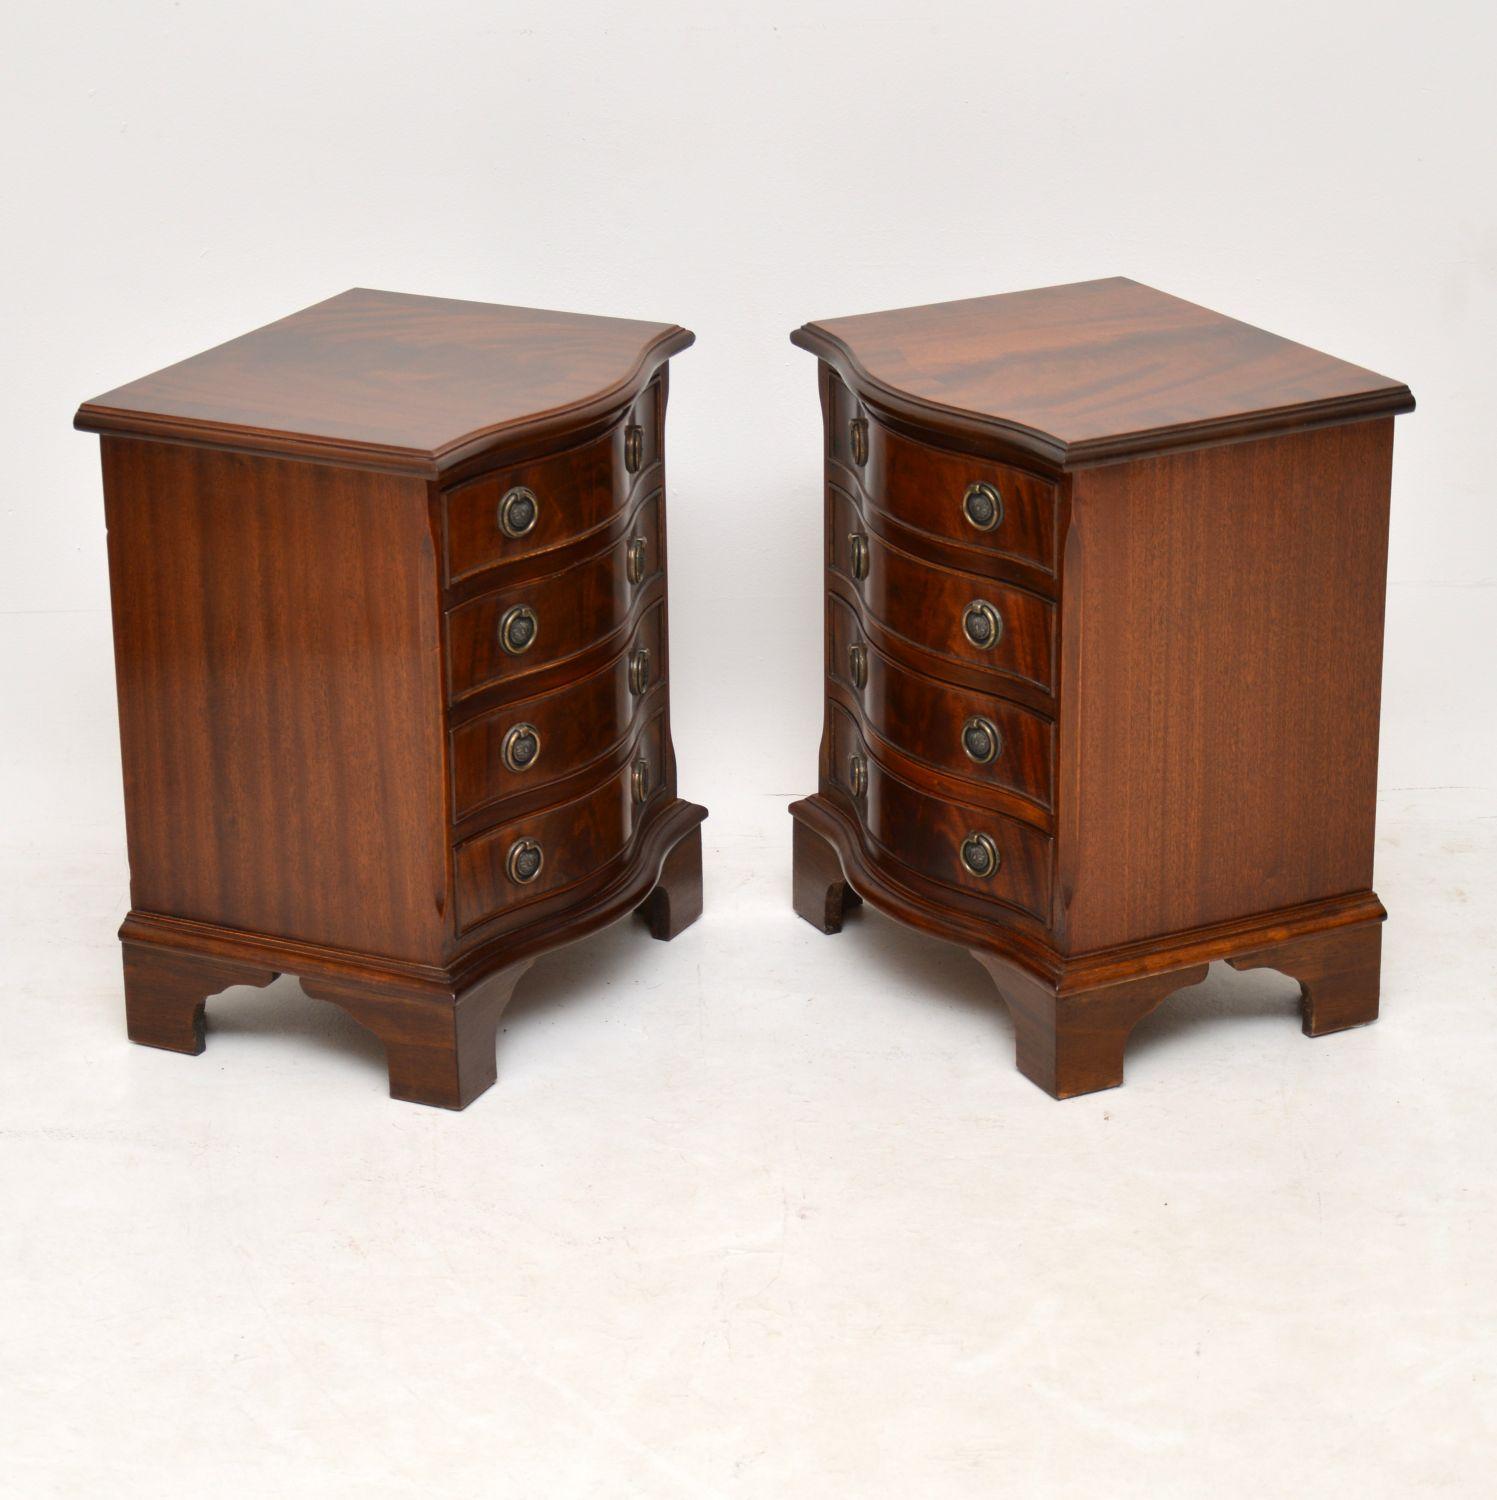 British Pair of Antique Georgian Style Mahogany Bedside Chests